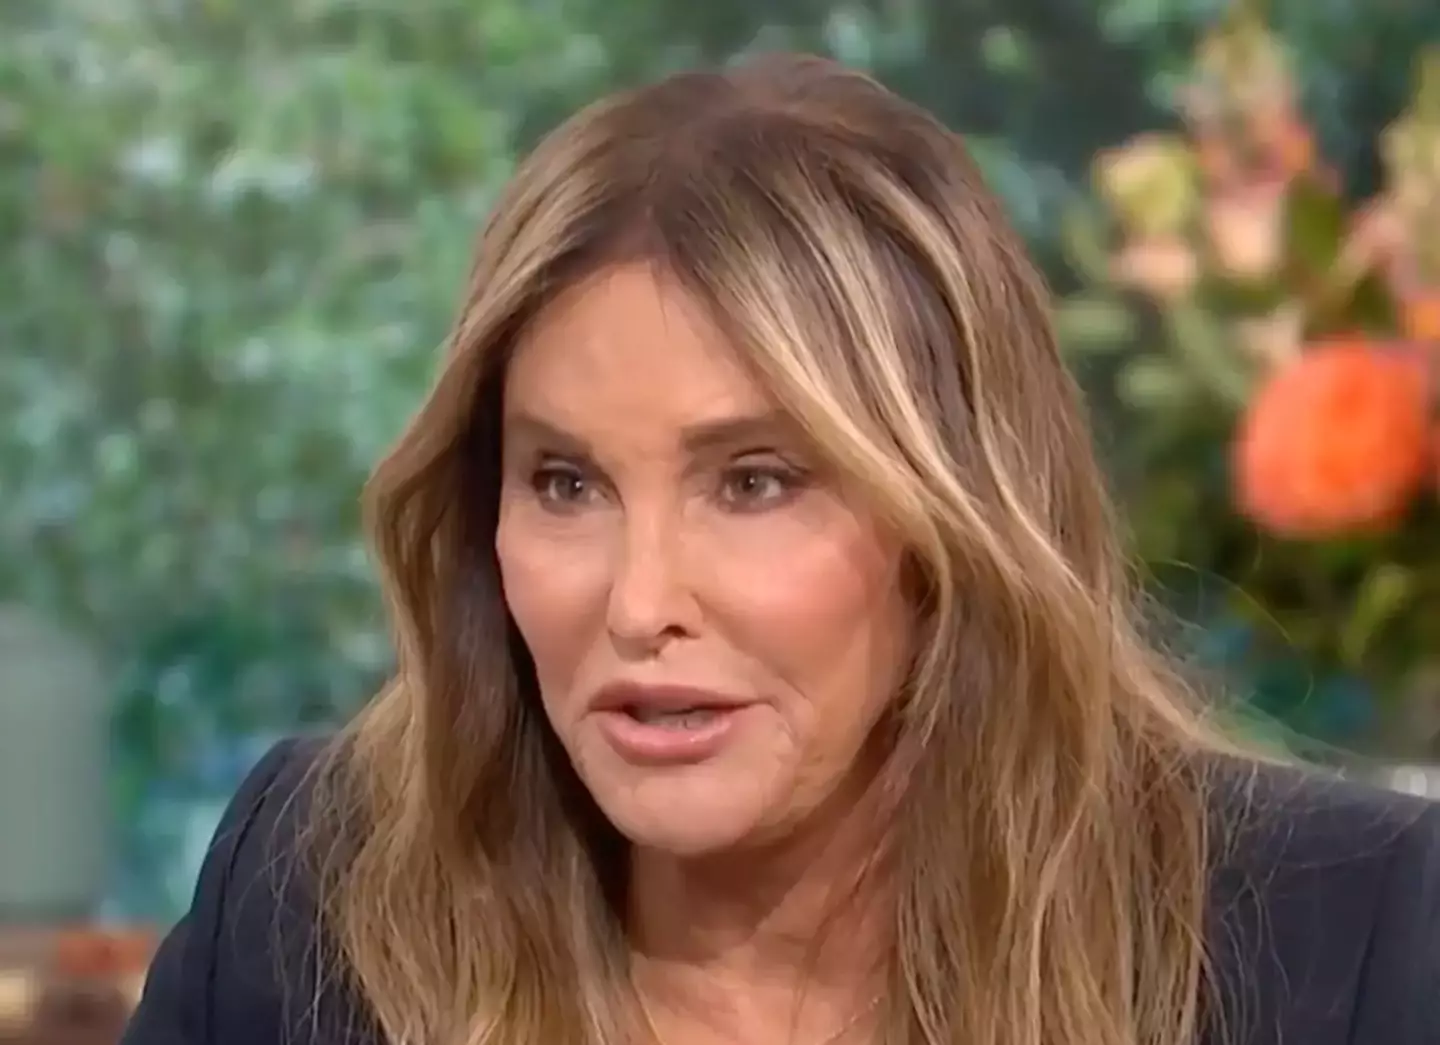 Caitlyn Jenner recently admitted she and Kris no longer speak.